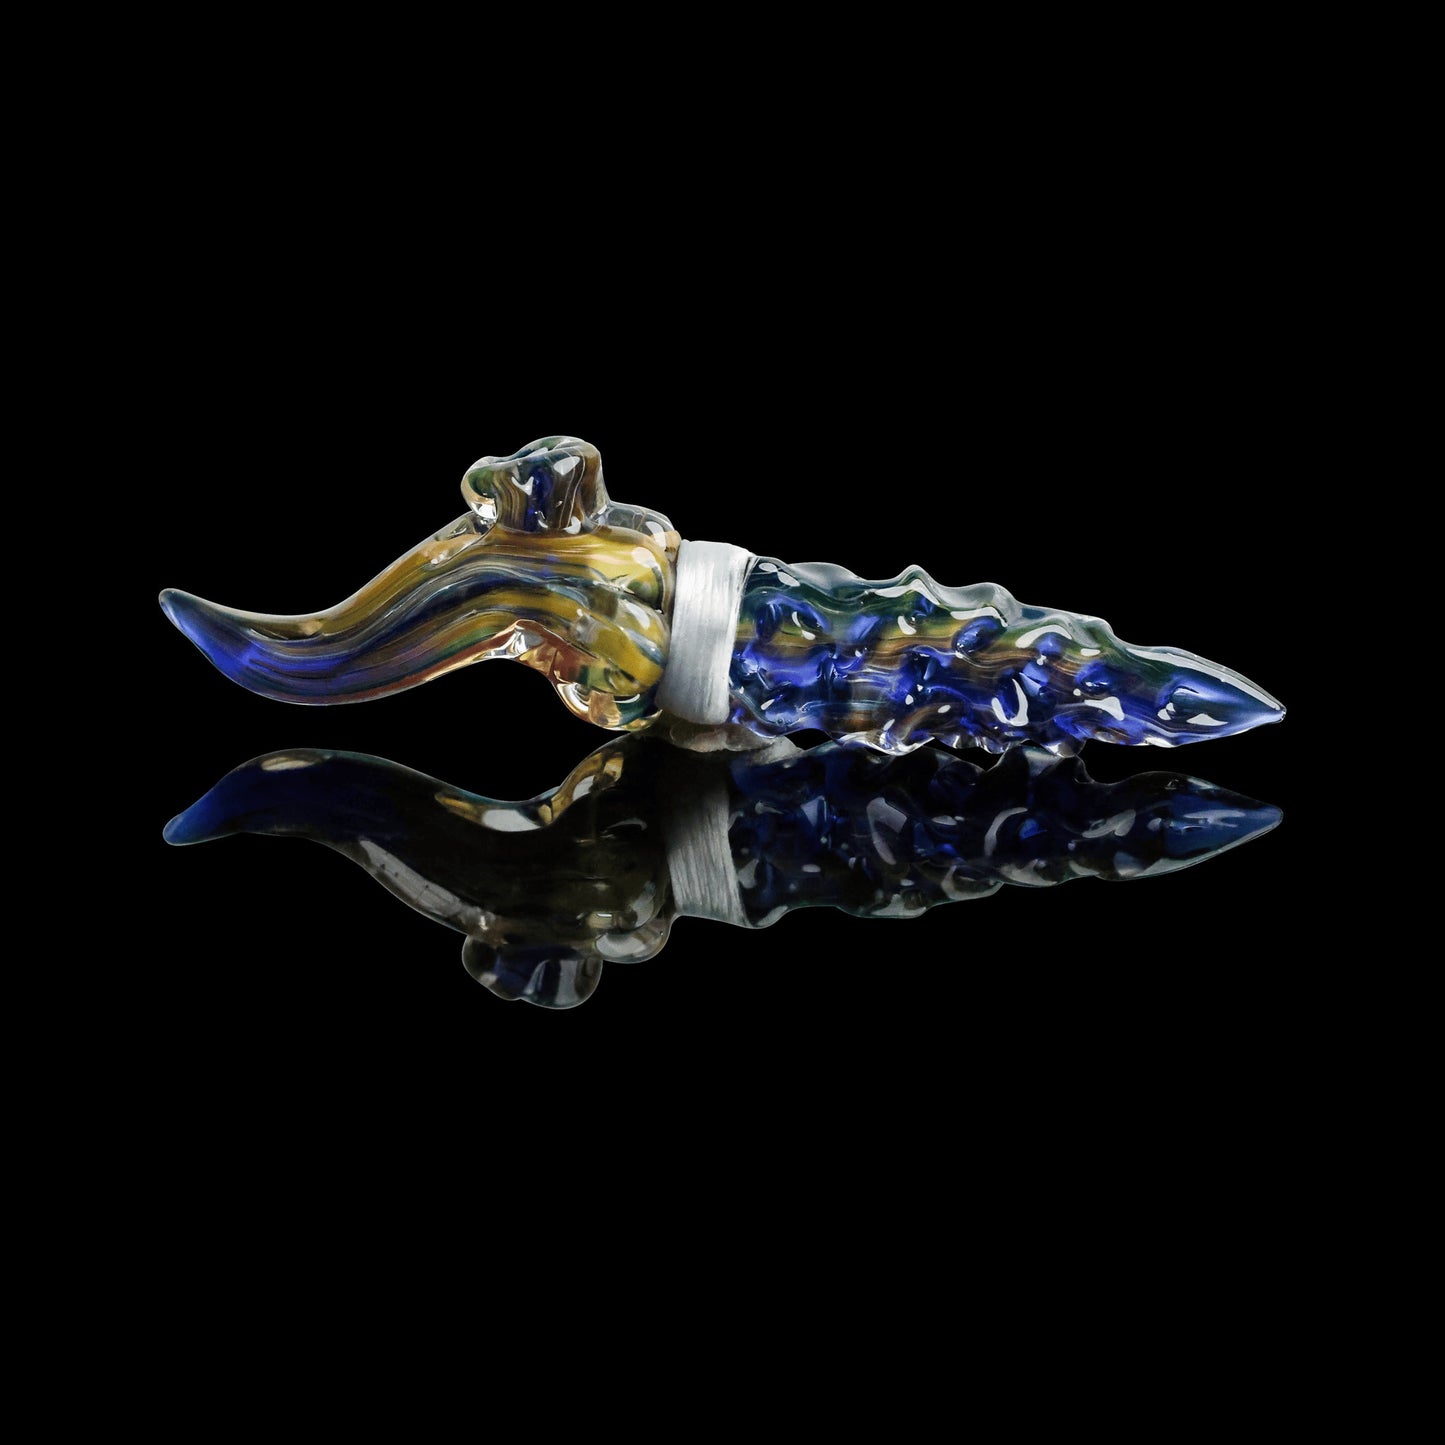 exquisite glass pendant - Dagger Collab Pendant by Nathan (N8) Miers x Elks That Run (2022 Drop)